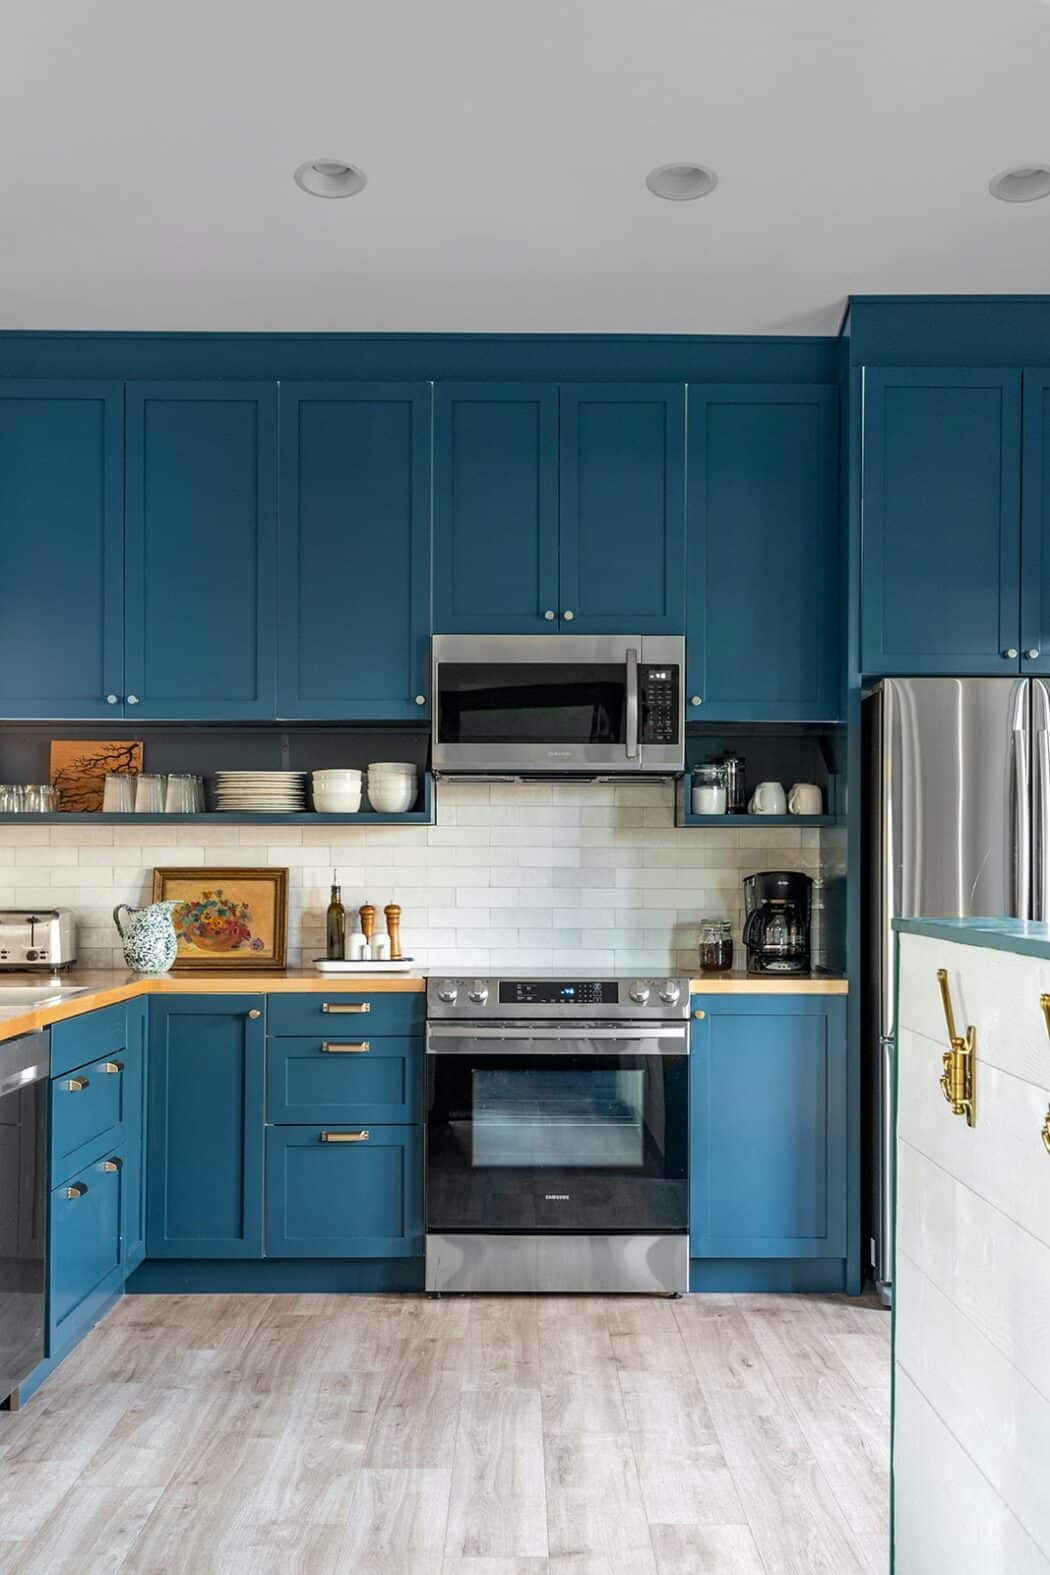 7 Blue Kitchen Ideas To Inspire a Cabinet Refresh